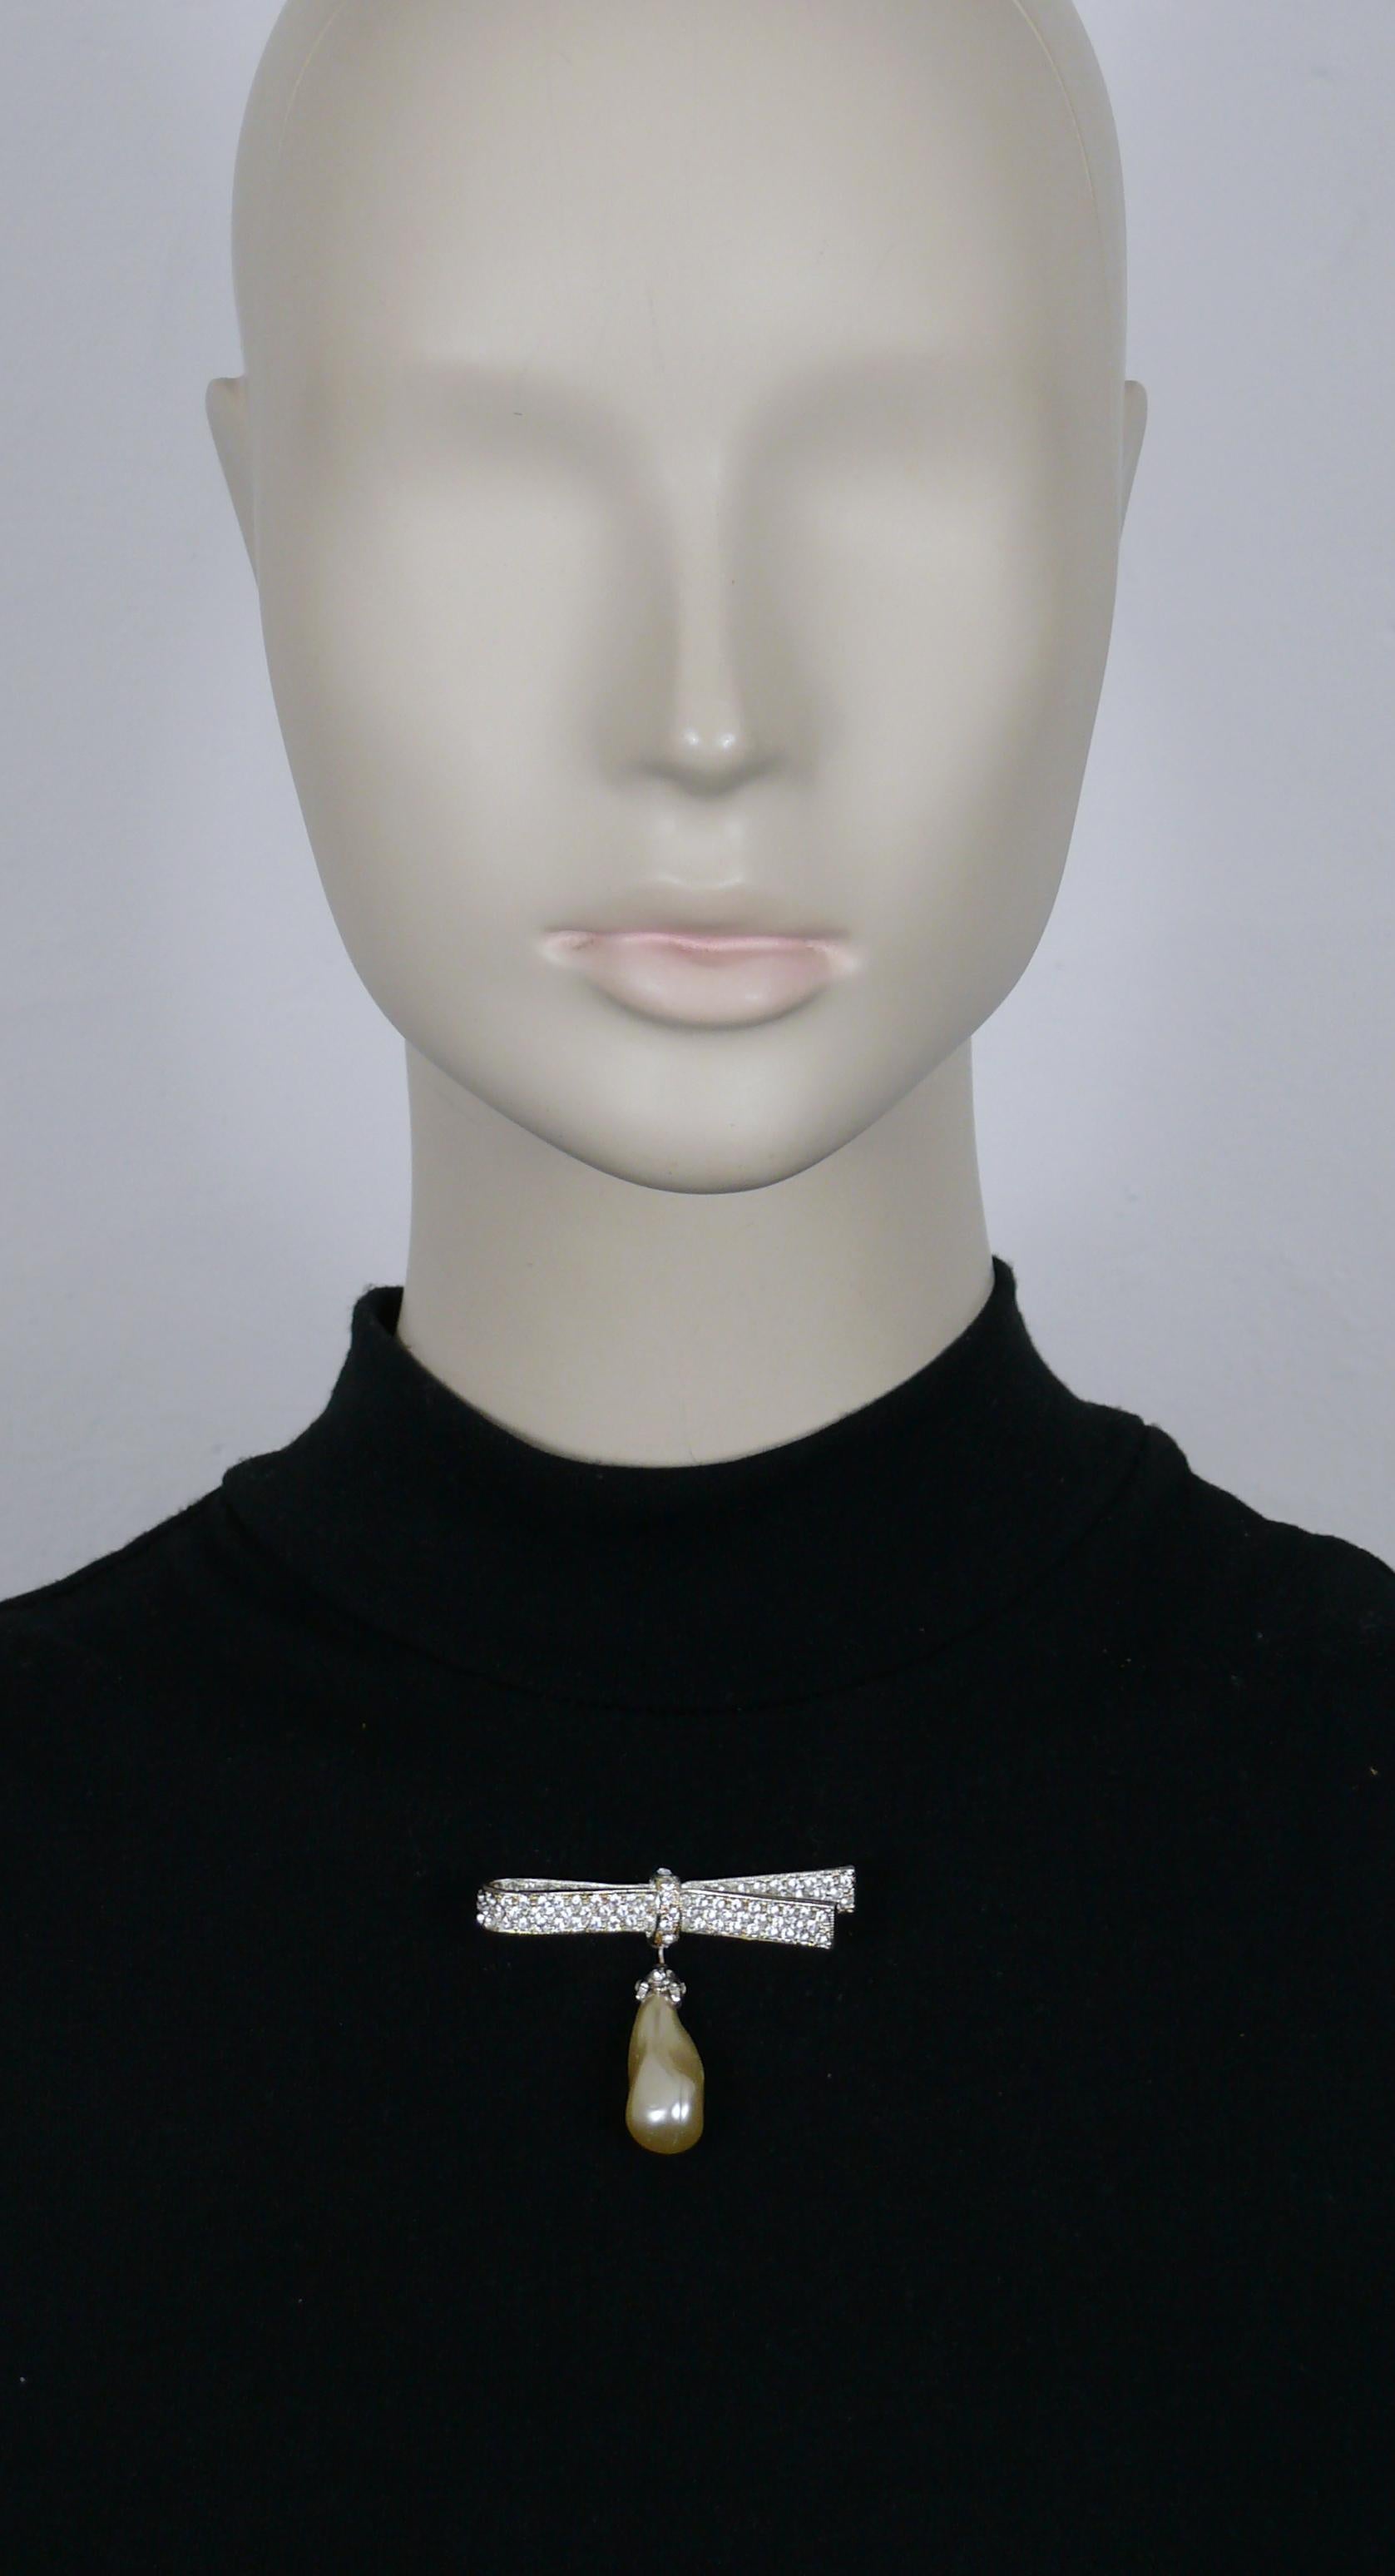 CHRISTIAN DIOR Boutique vintage silver tone ribbon bow brooch embellished with clear crystals and a dangling faux pearl drop.

Marked CHRISTIAN DIOR Boutique.

Indicative measurements : max. width approx 5.7 cm (2.24 inches) / max. height approx.